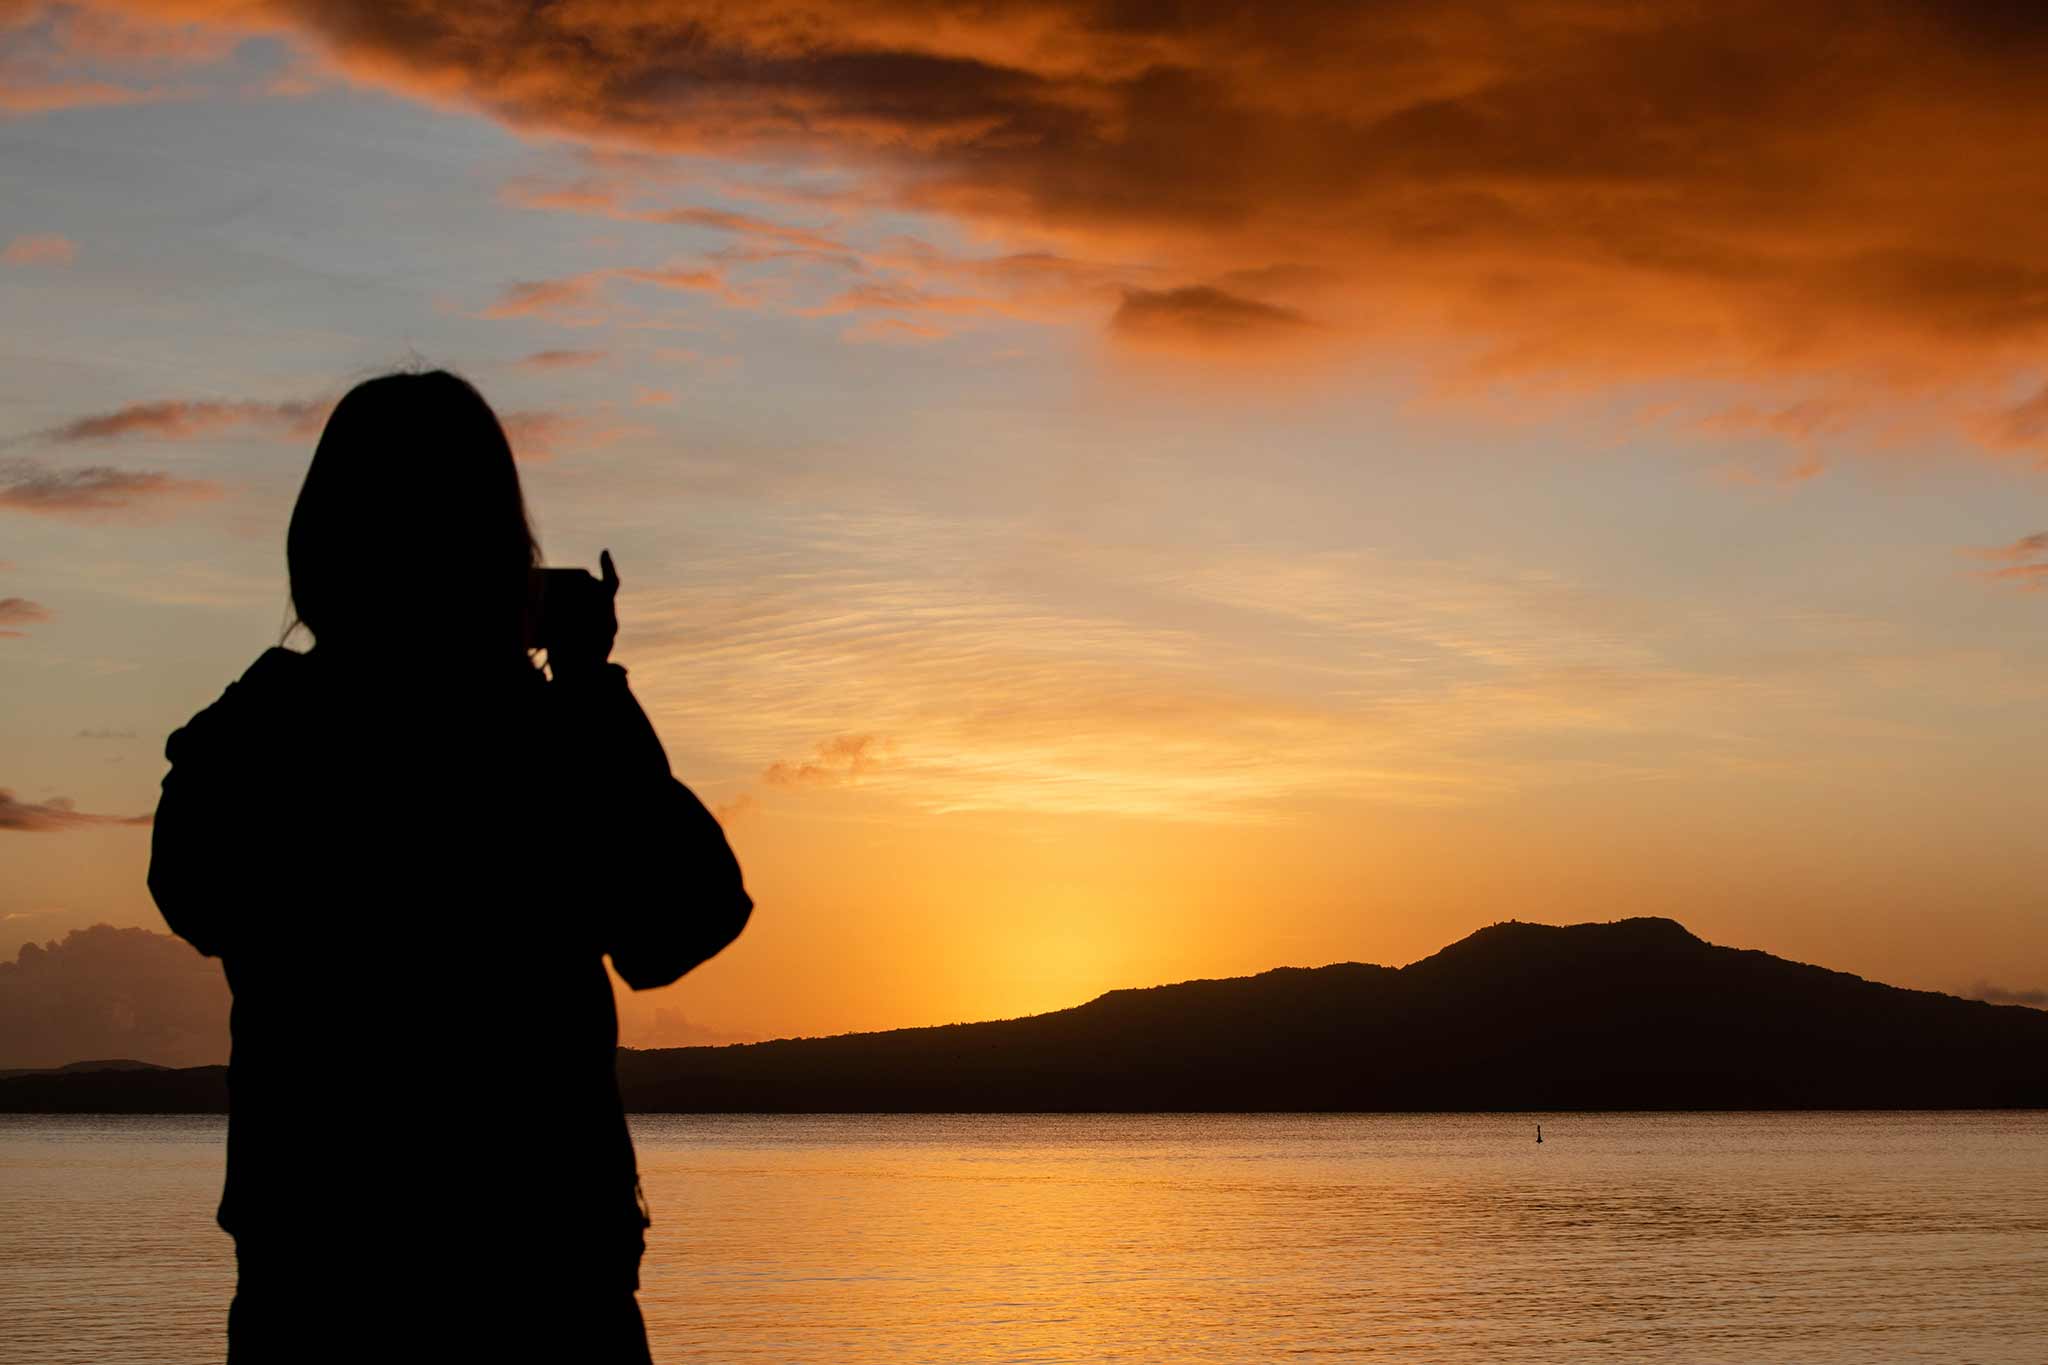 Photo of the silhouette of a person taking a photo of the sunrise over Rangitoto Island.